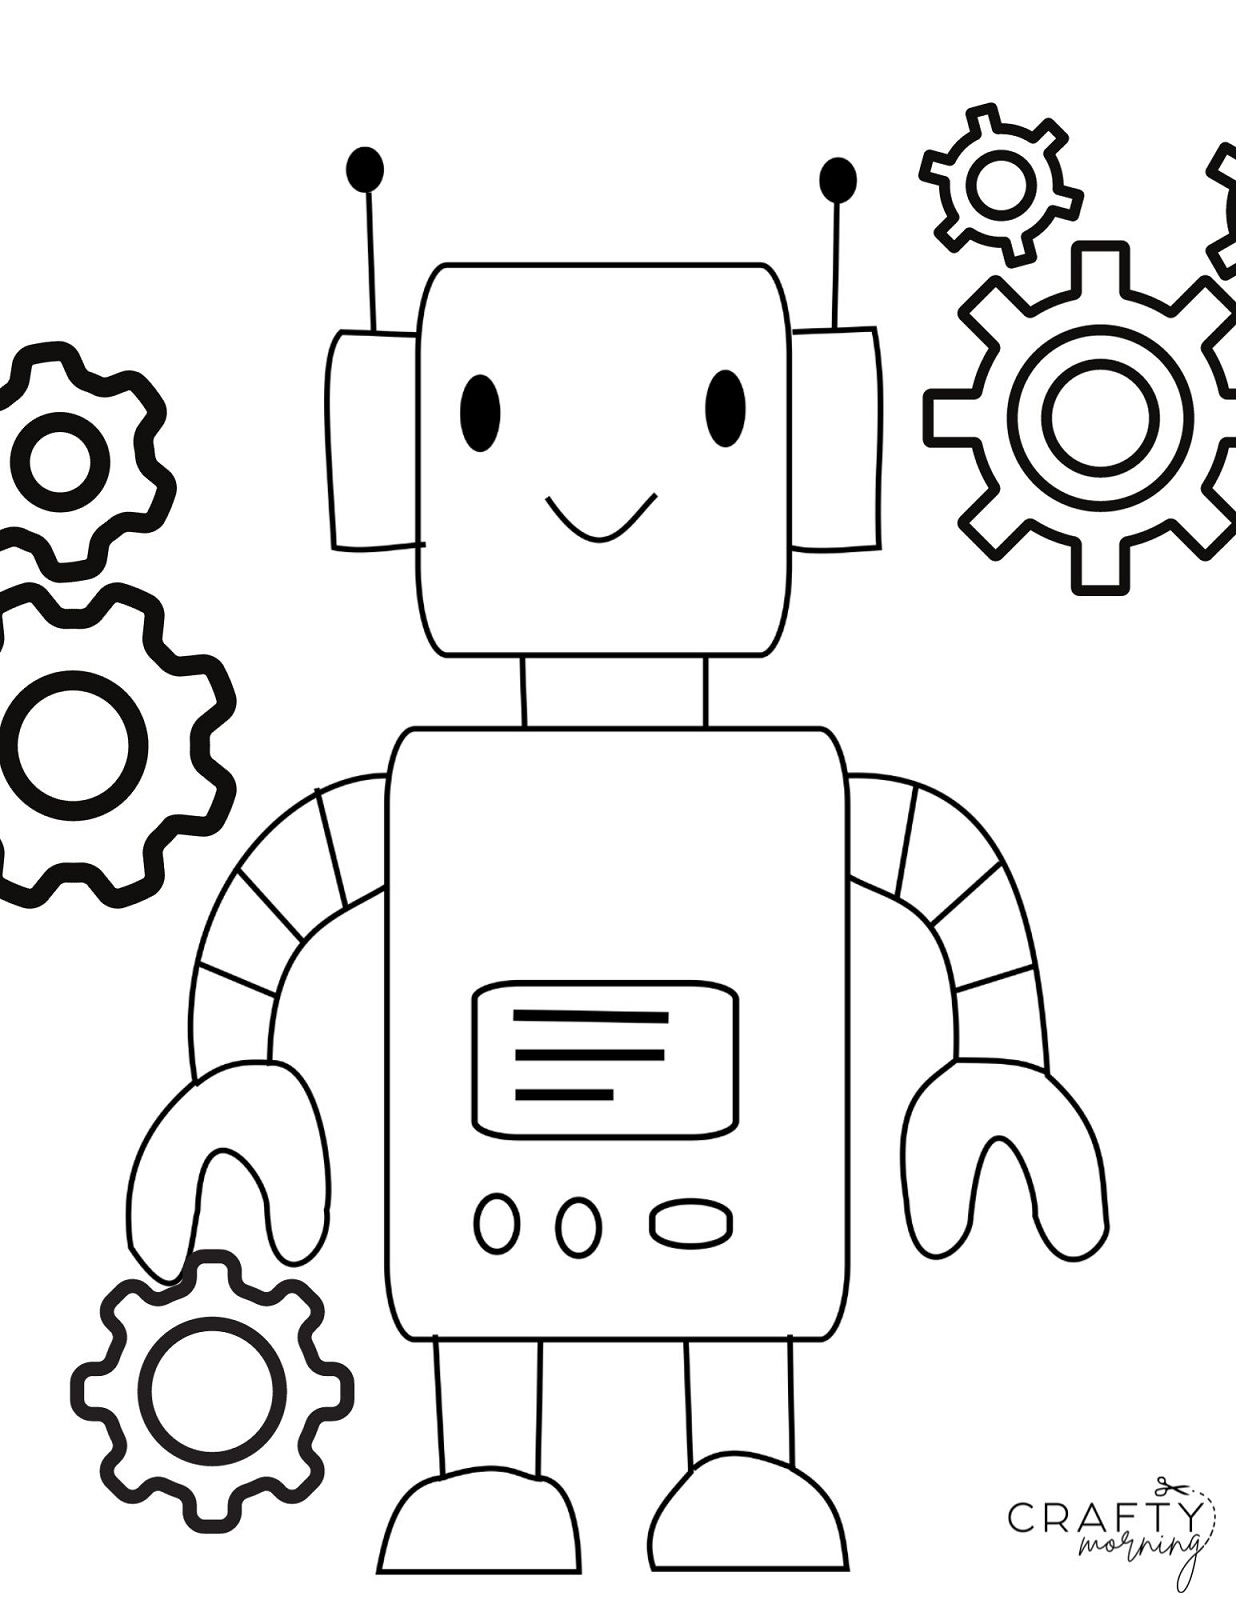 Learn How to draw a Friendly Robot | Teach Drawing Coloring Page - YouTube